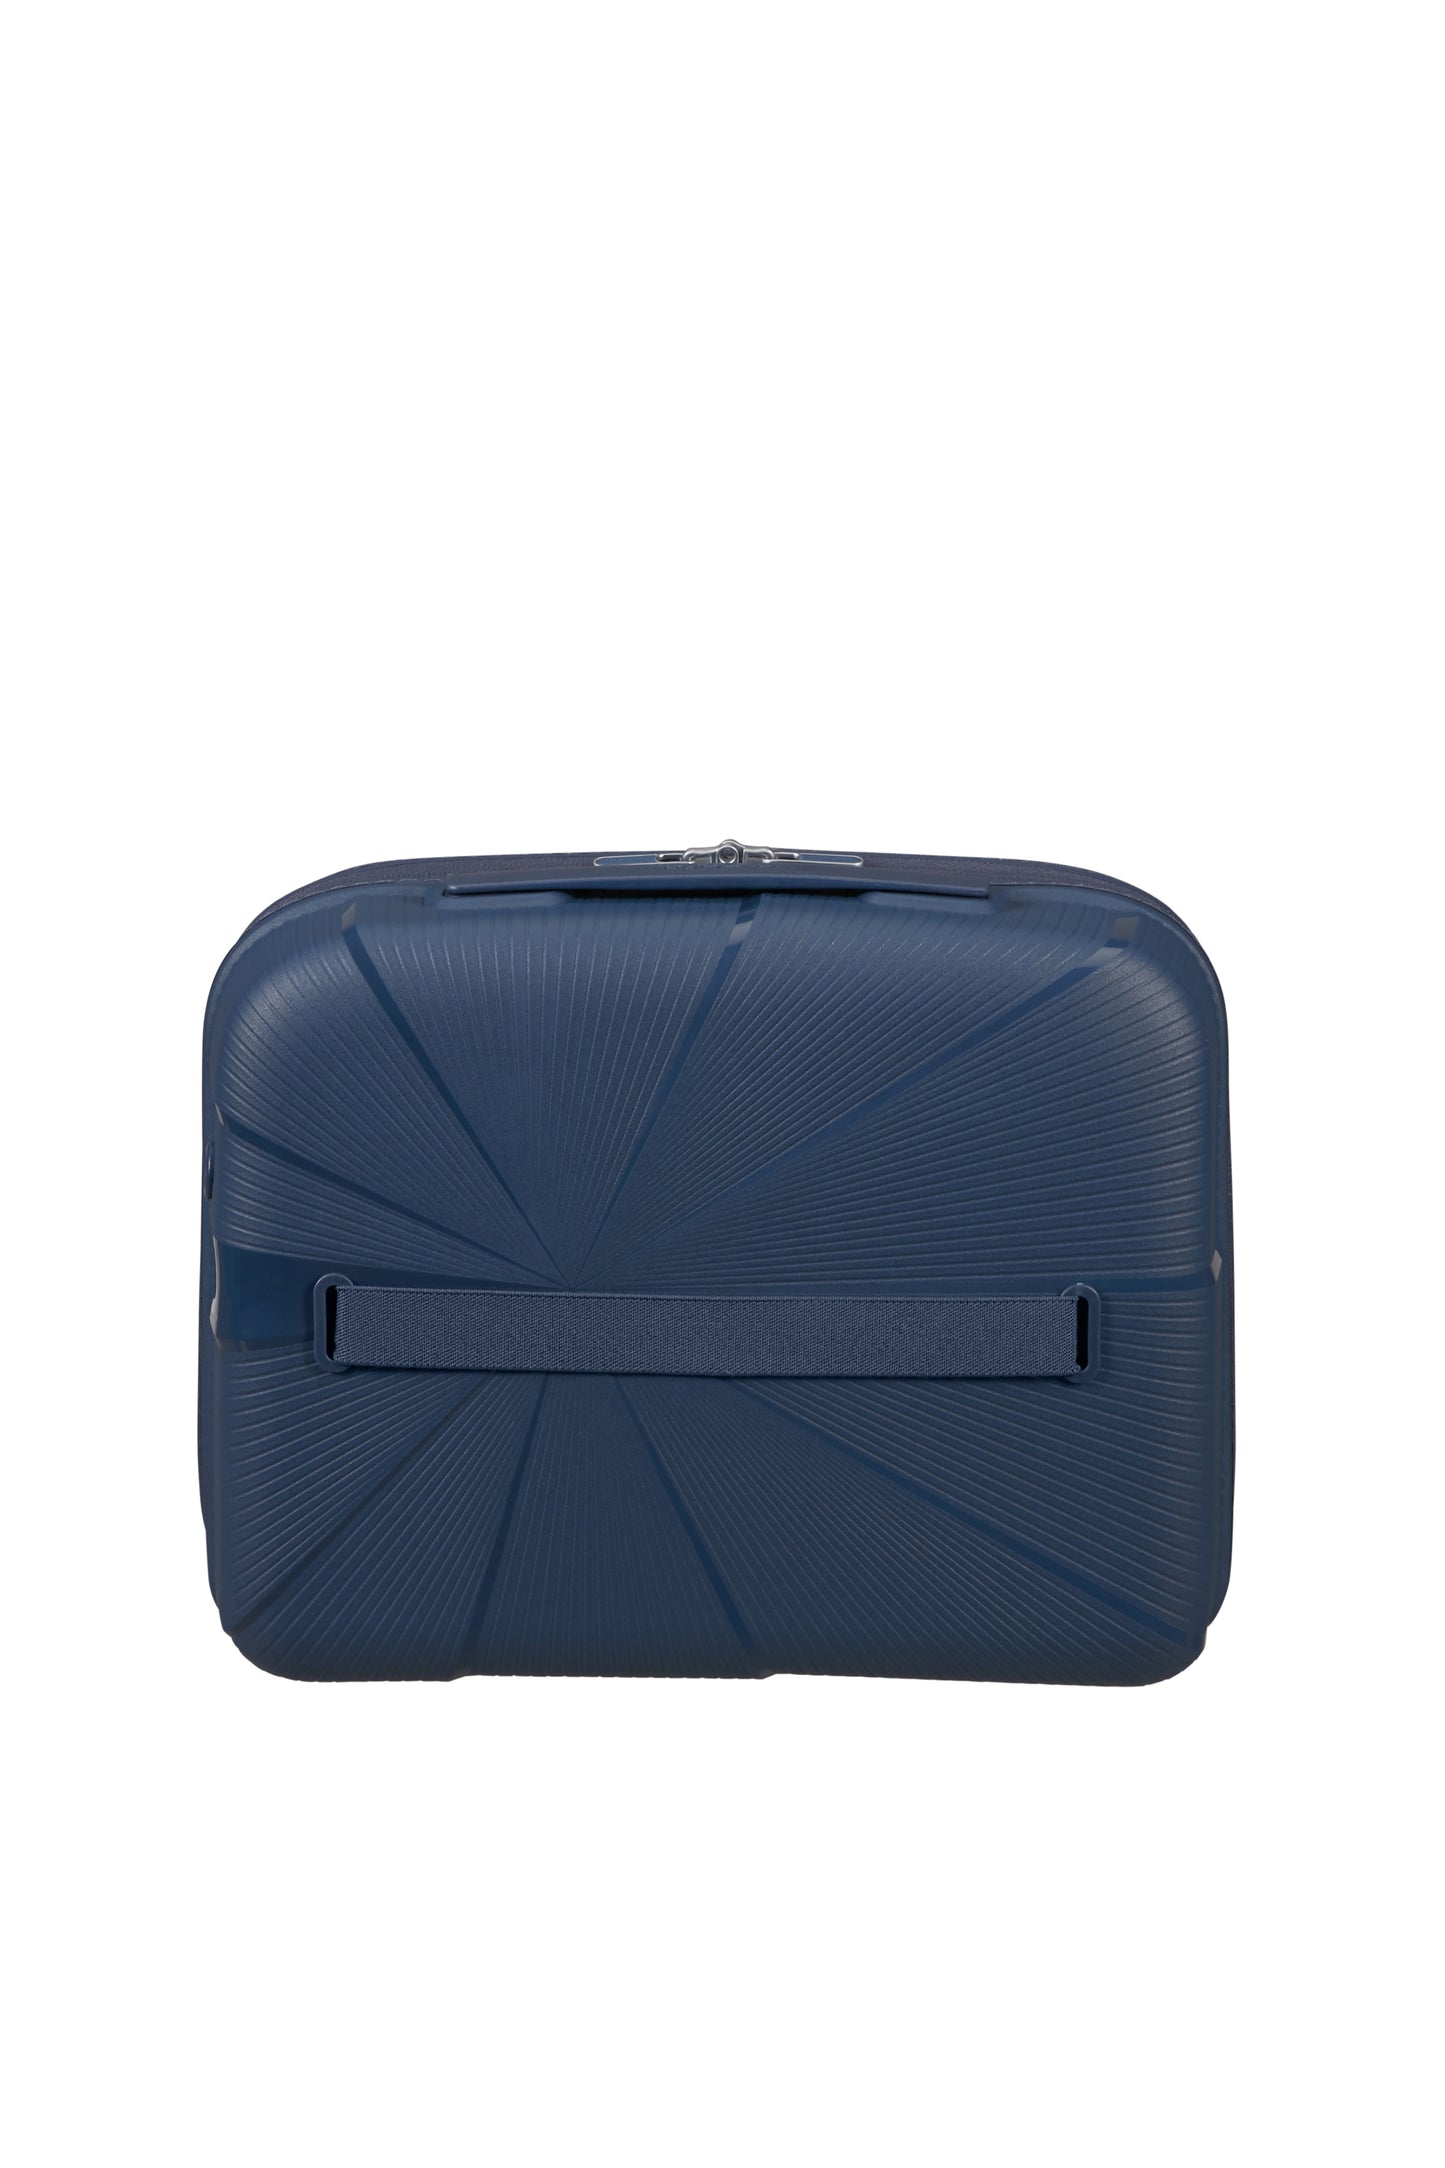 American Tourister STARVIBE  beauty case  navy